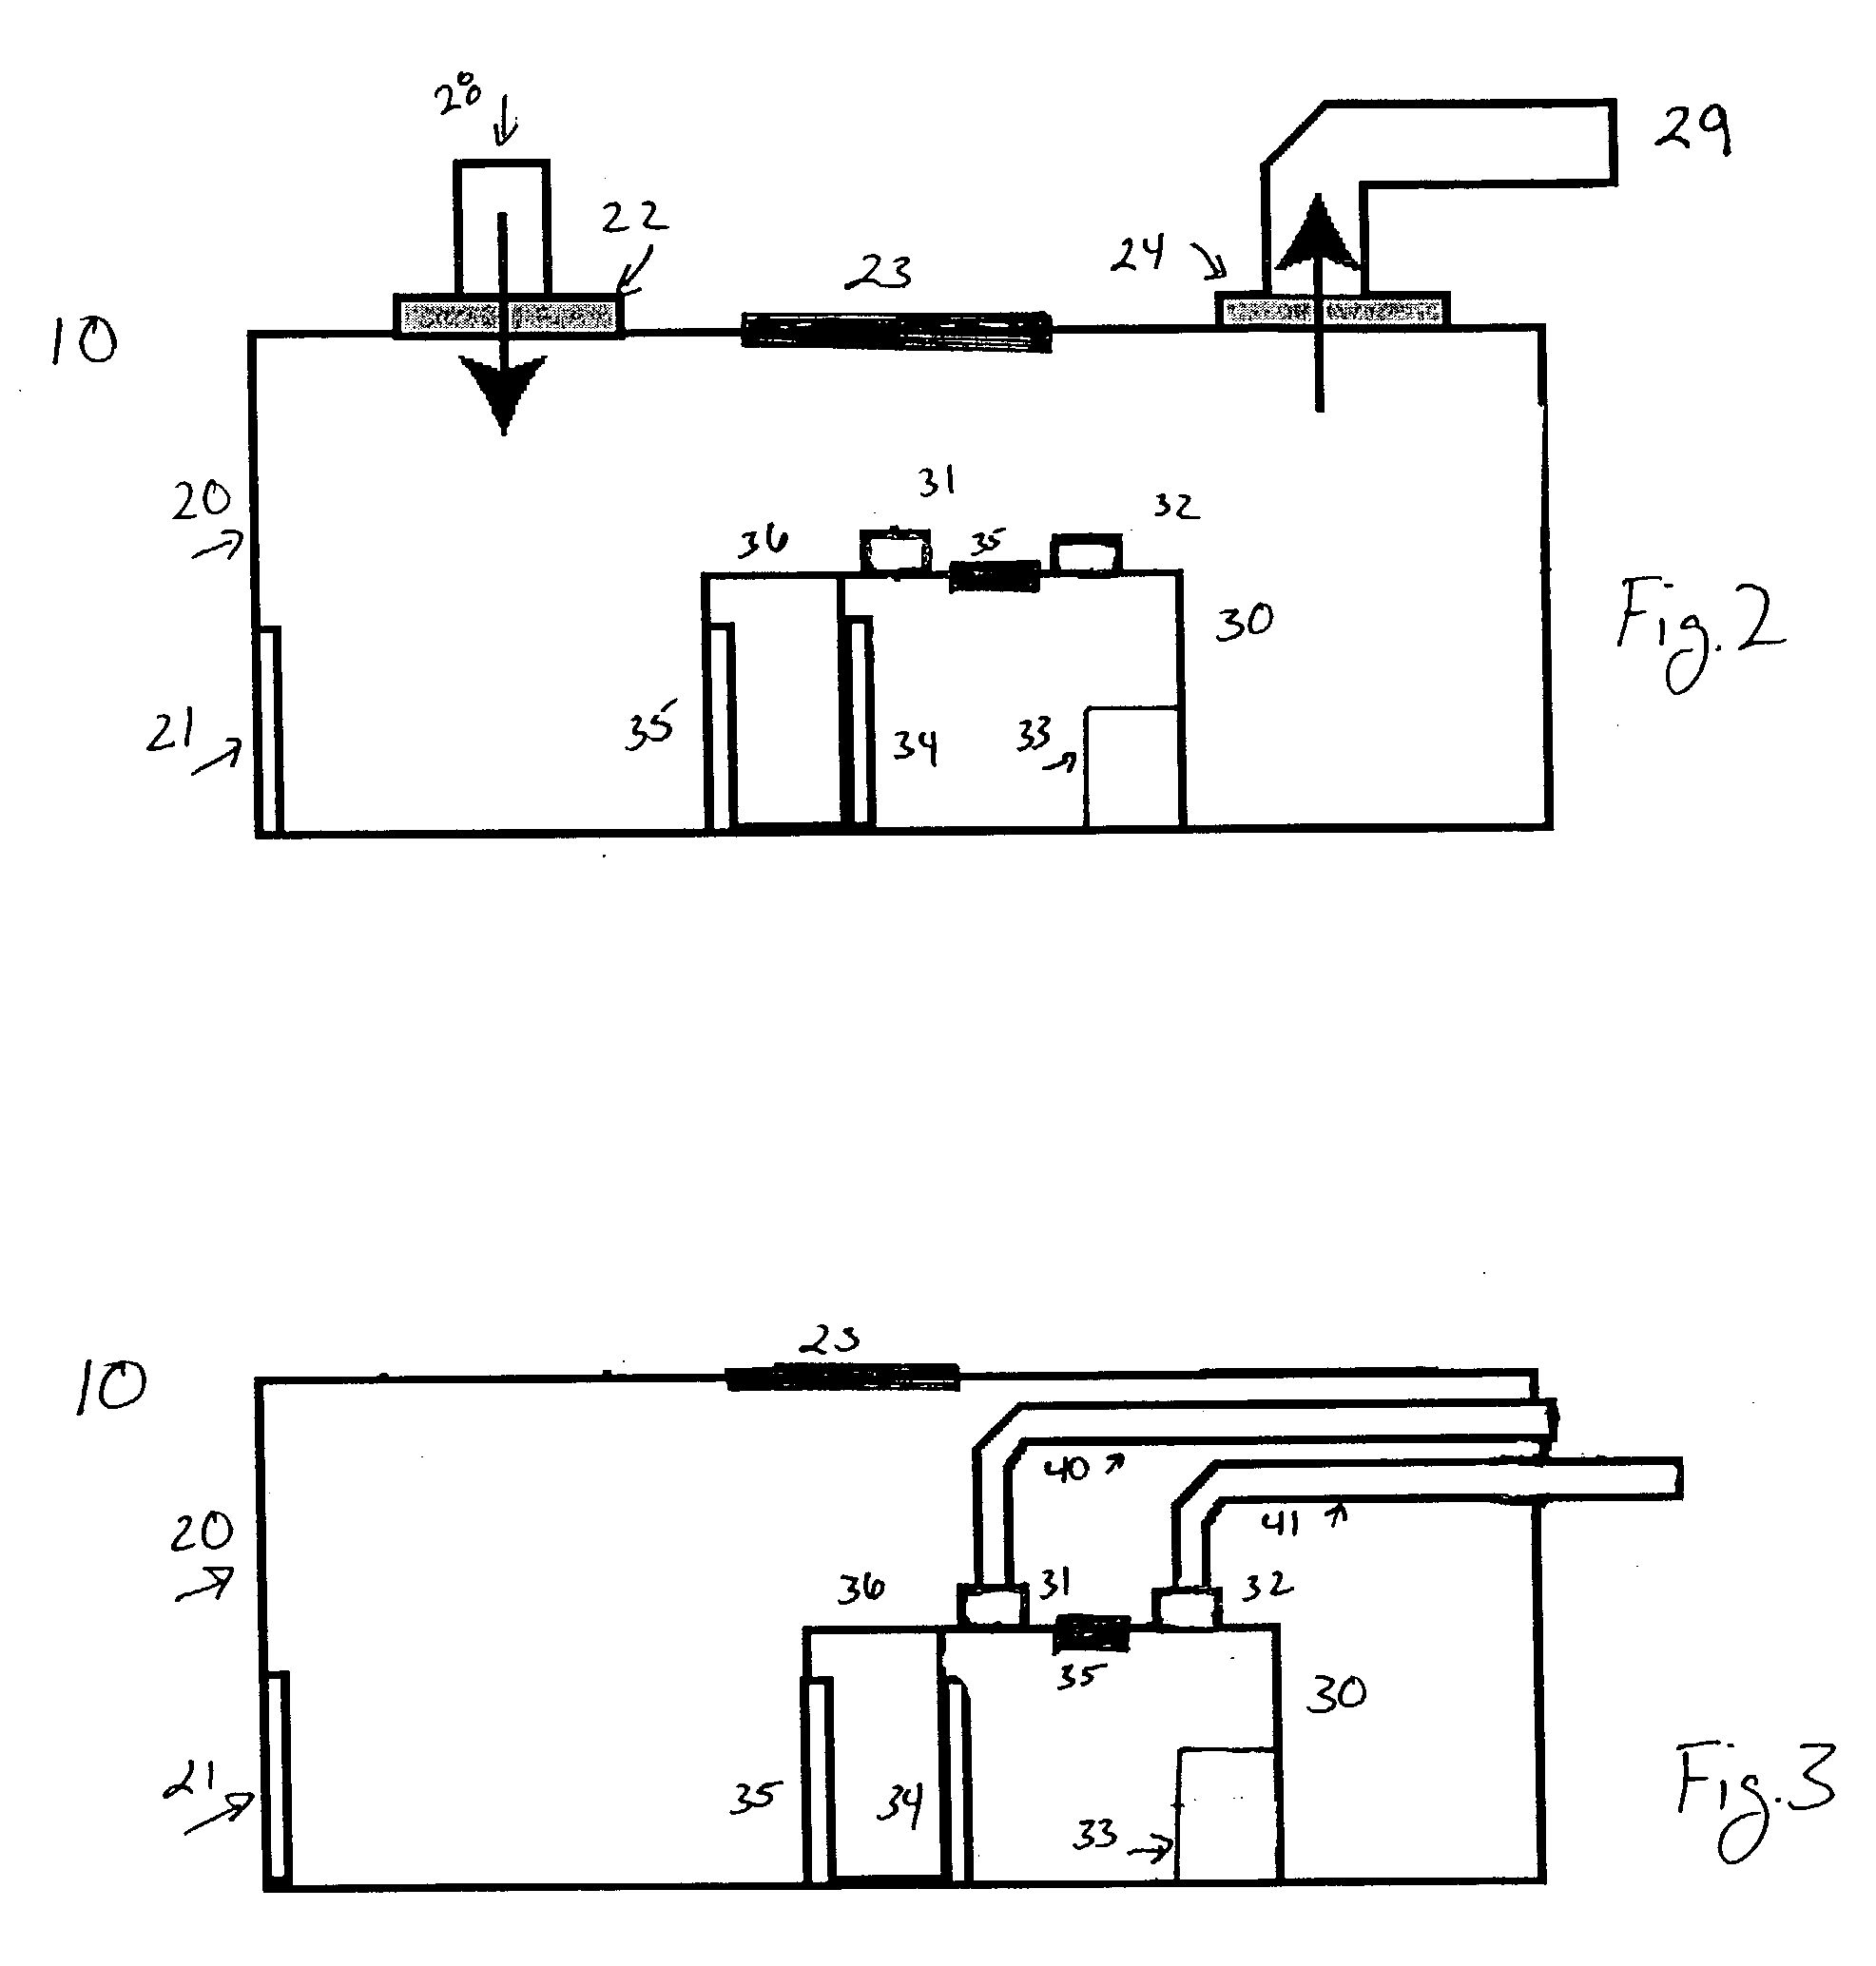 Modular biosafety containment apparatus and system